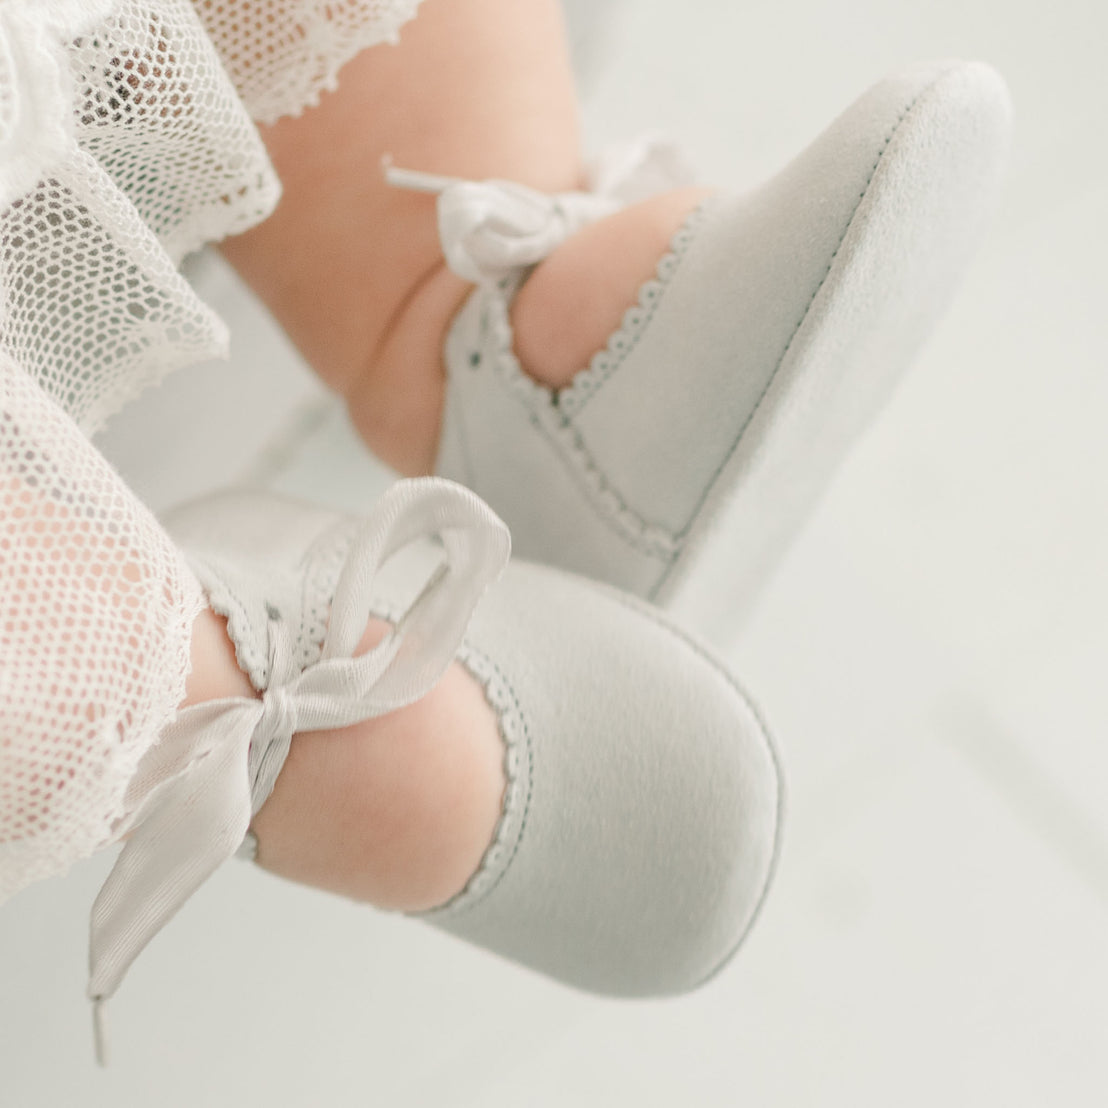 Baby girl wearing the dove grey Emily Suede Tie Mary Janes. Shoes are made with a soft suede with tie detail closure.